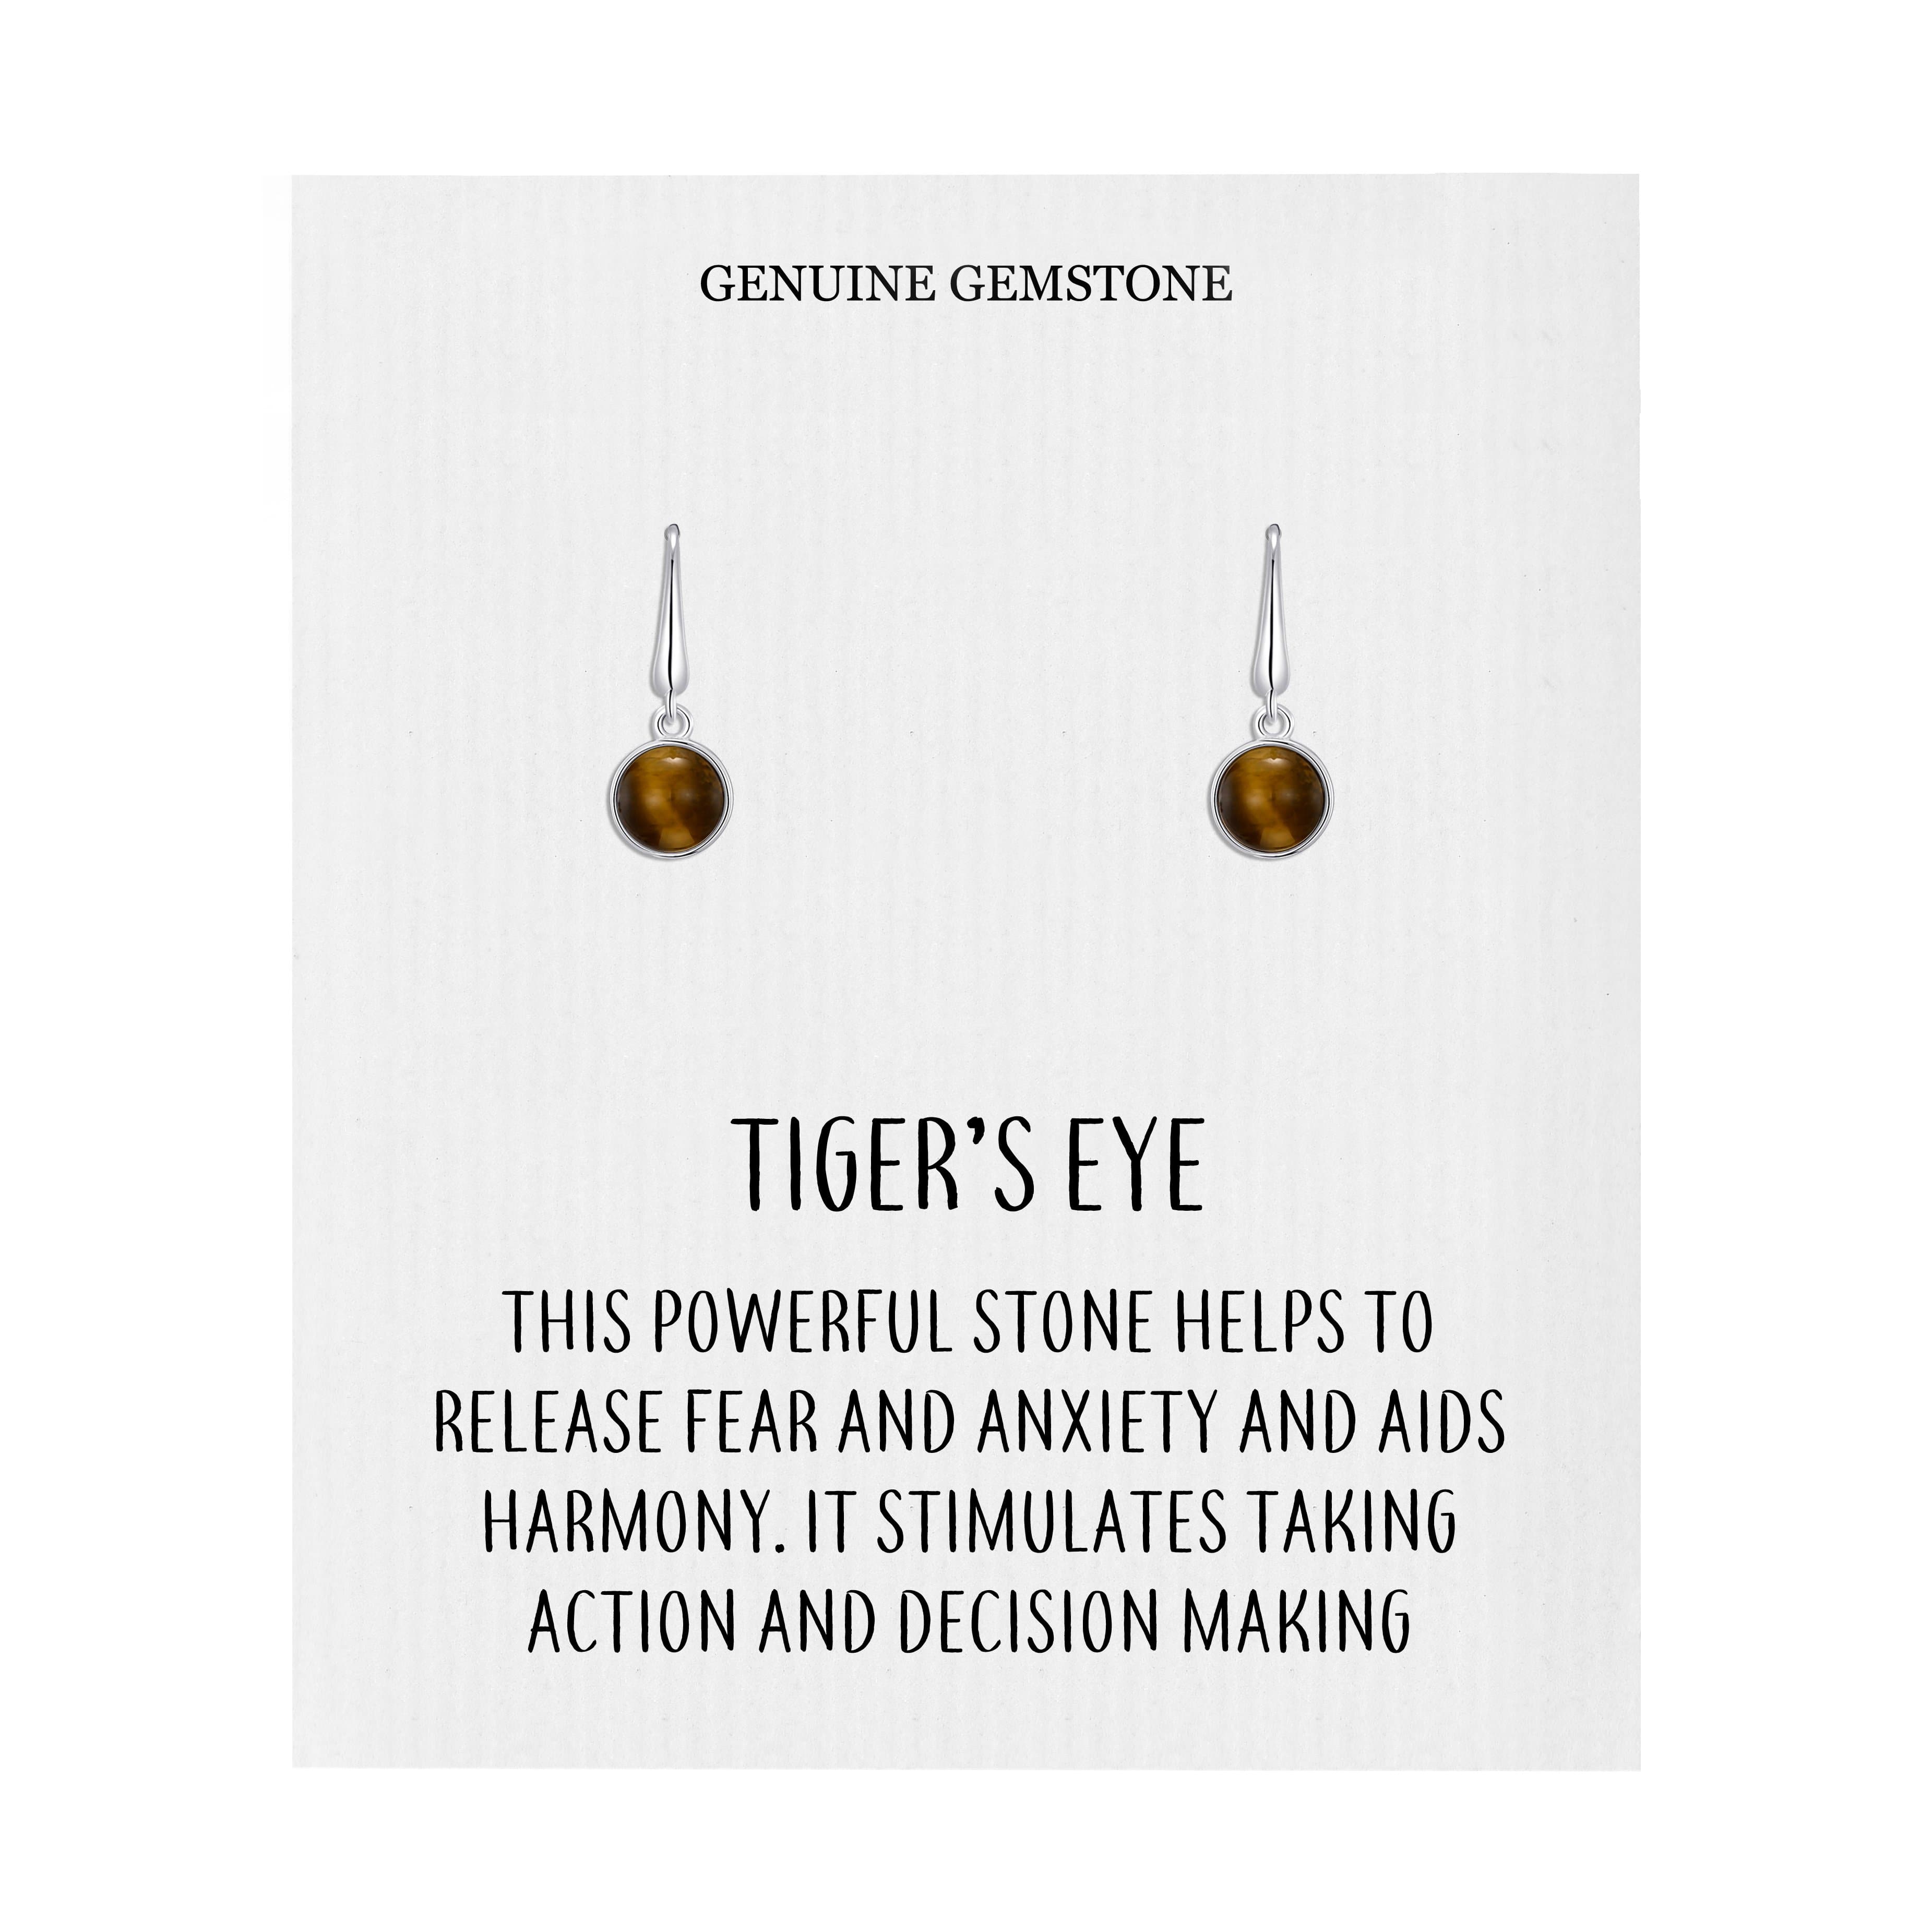 Tiger's Eye Drop Earrings with Quote Card by Philip Jones Jewellery